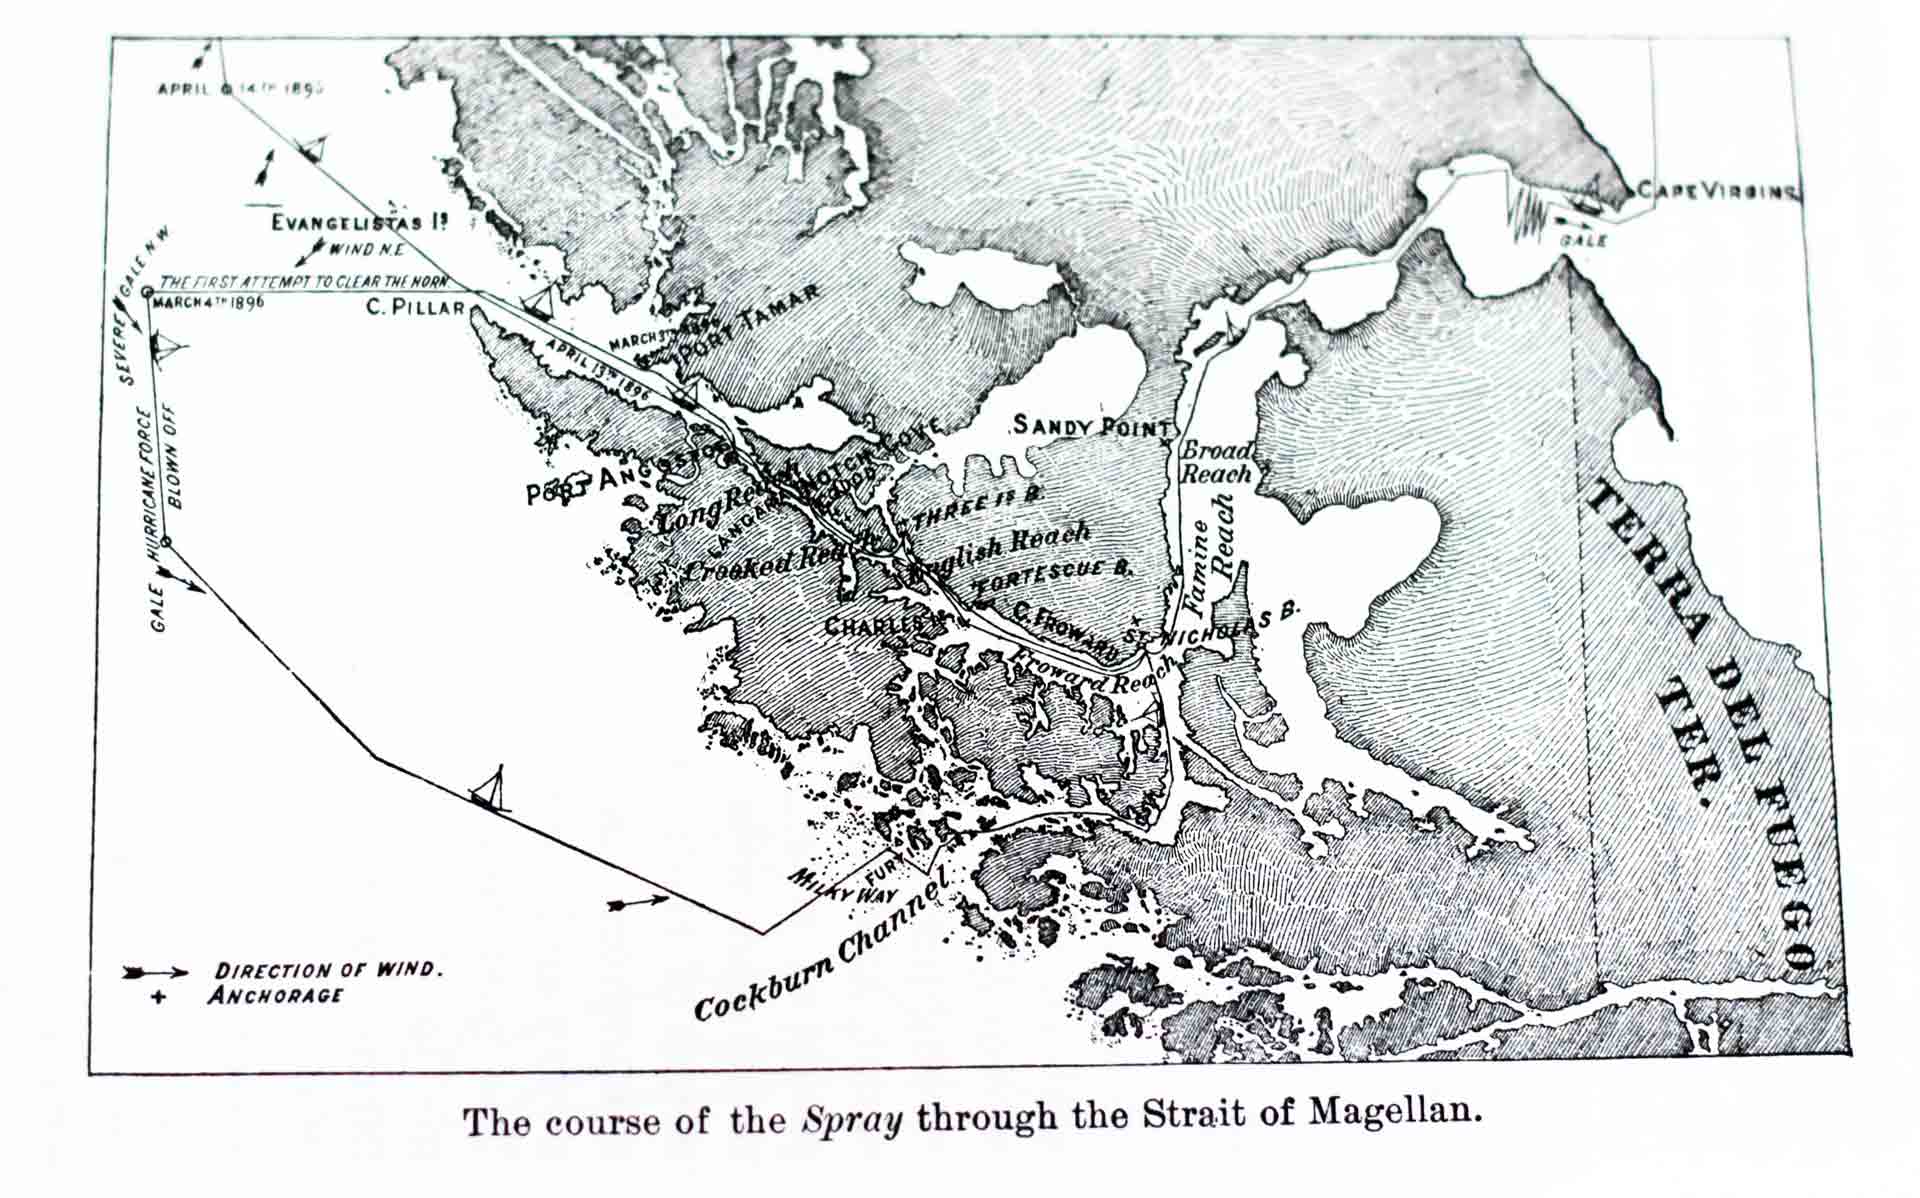 Sailing the Strait of Magellan: The best Chapter of the Book.